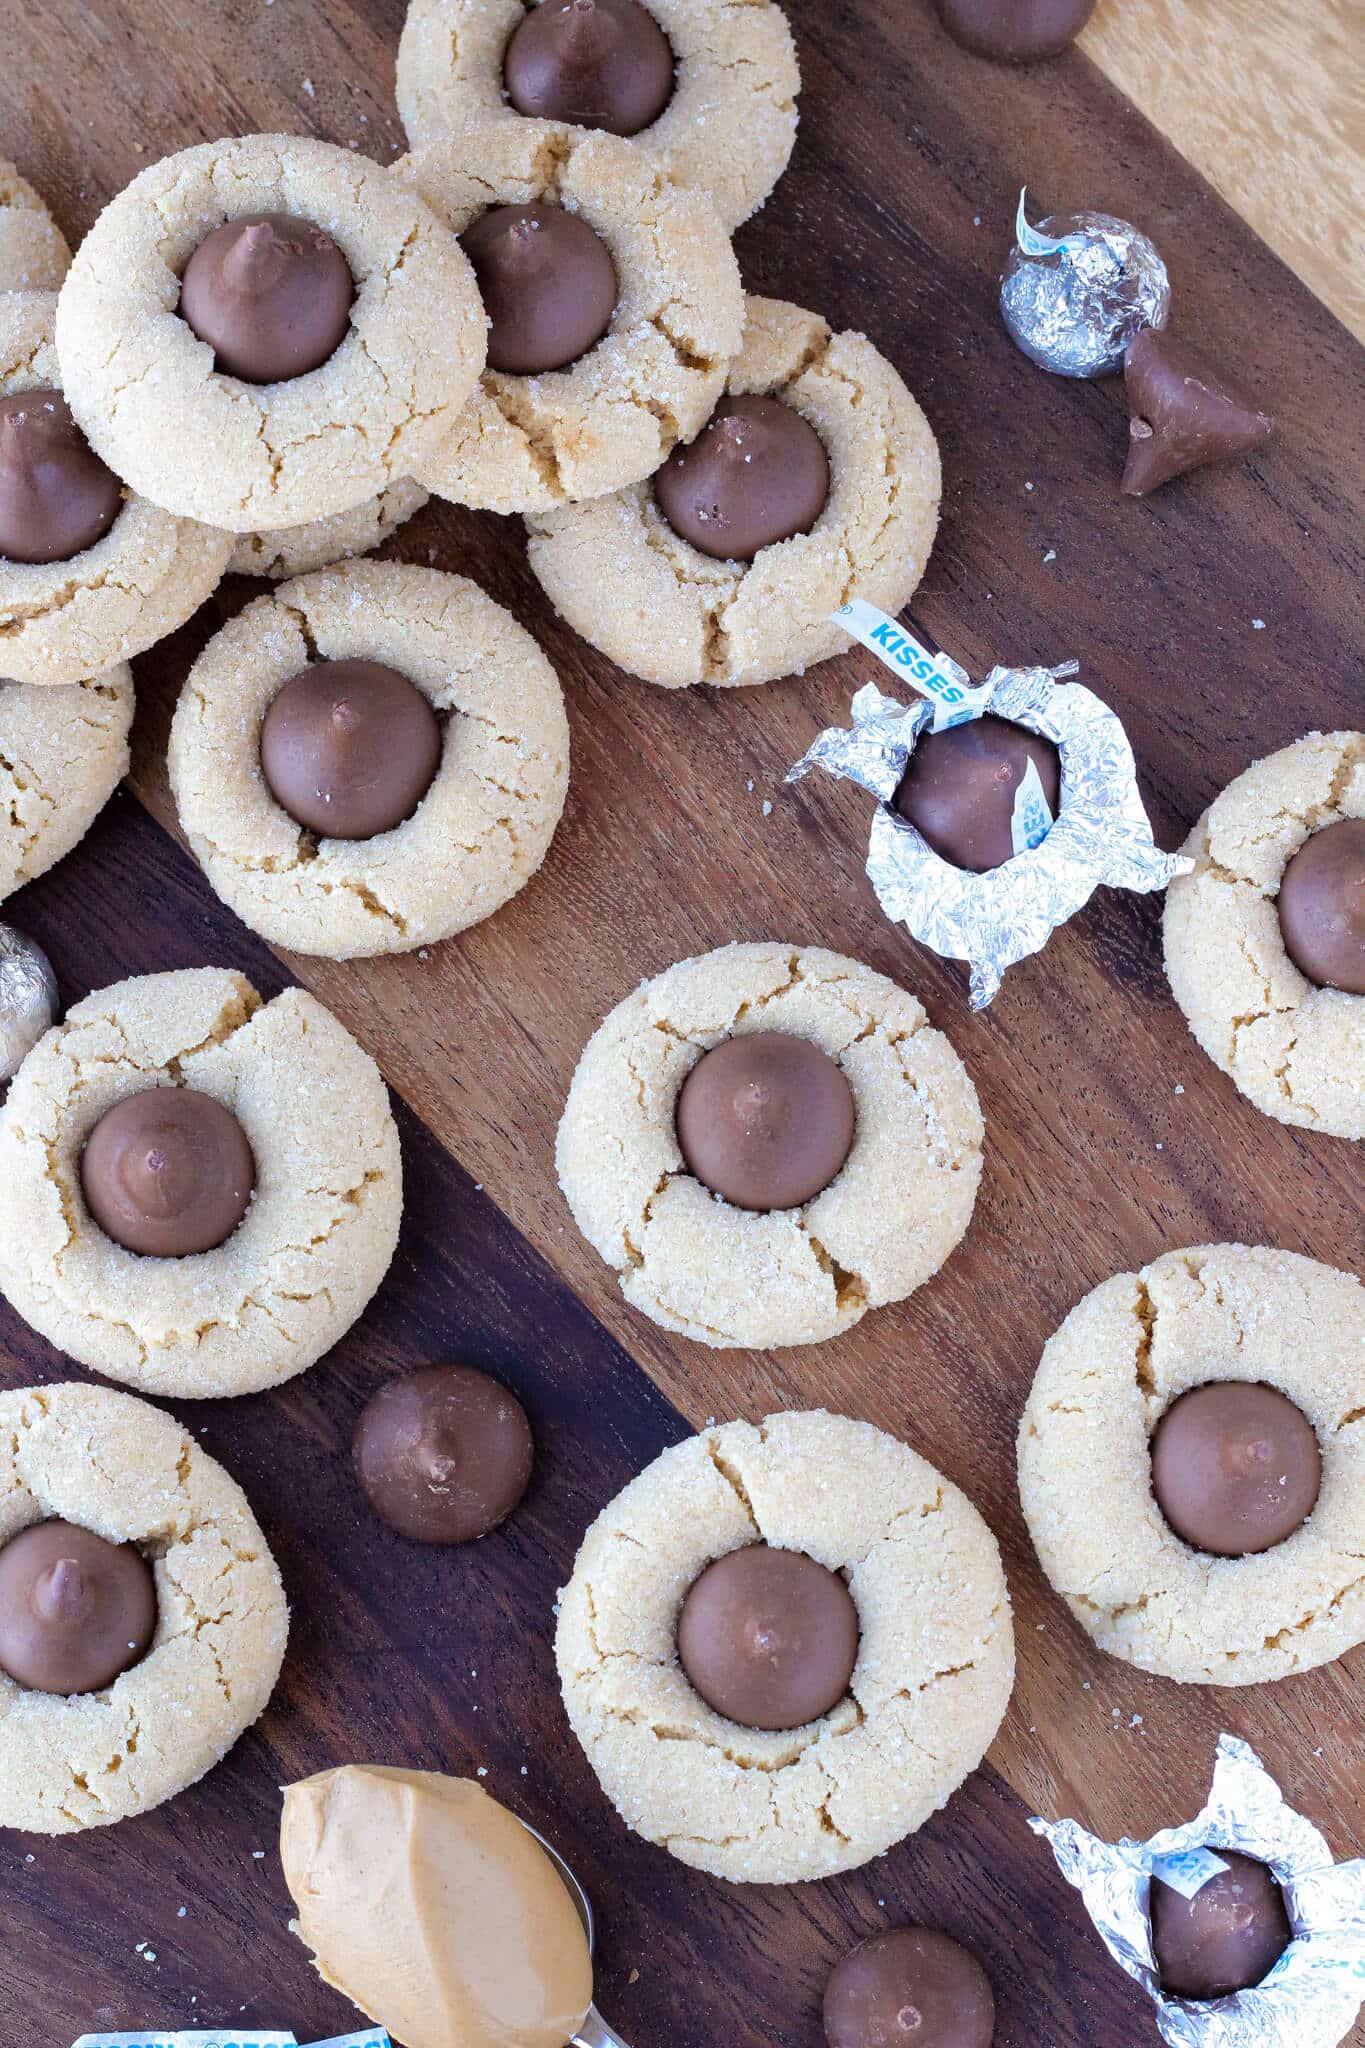 Peanut Butter Blossoms arranged with Hershey's kisses